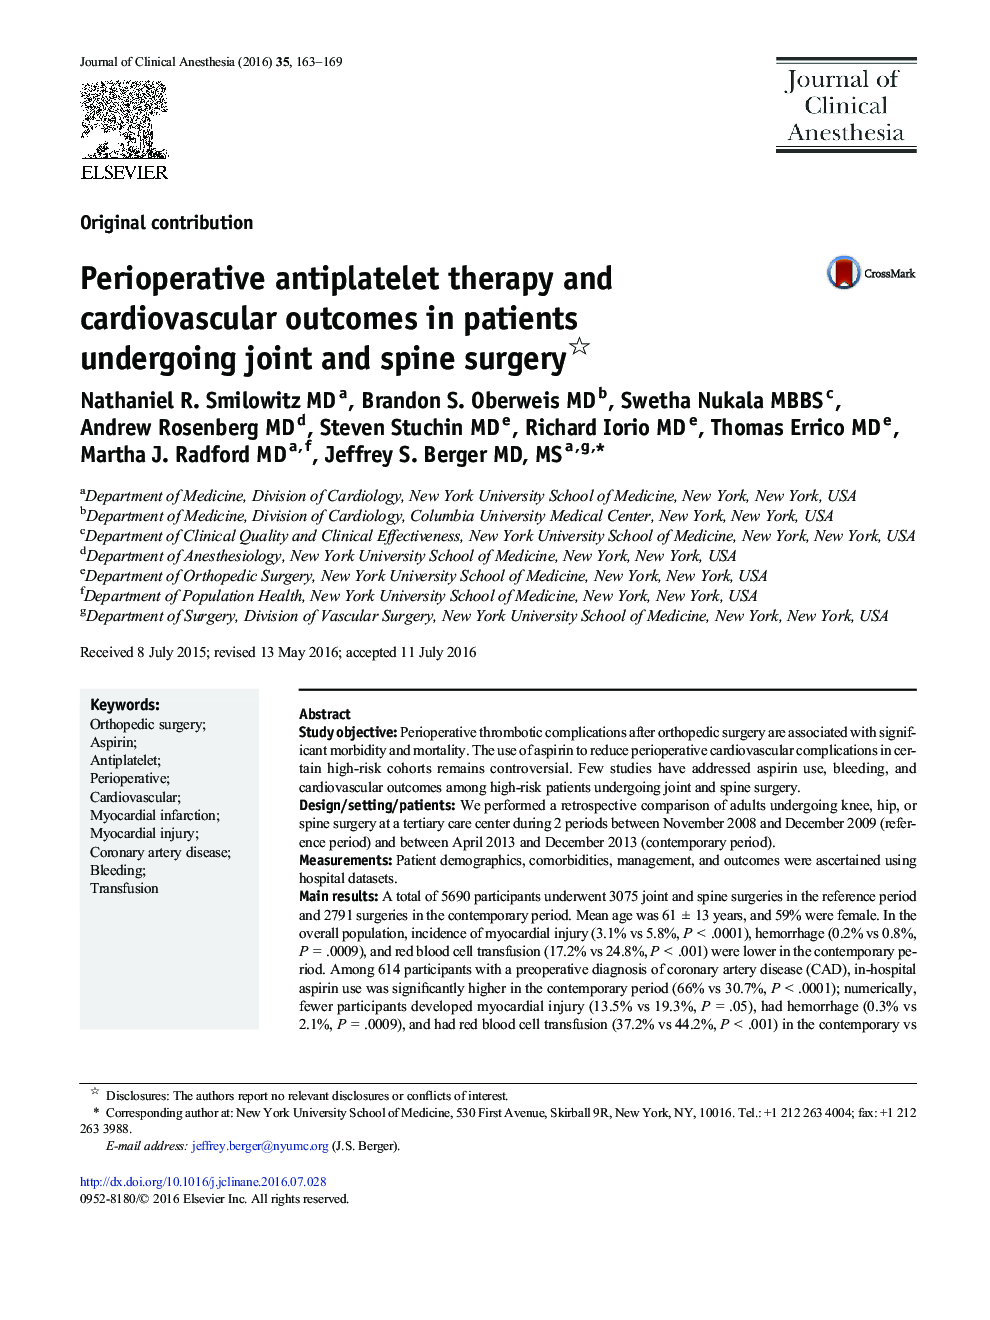 Perioperative antiplatelet therapy and cardiovascular outcomes in patients undergoing joint and spine surgery